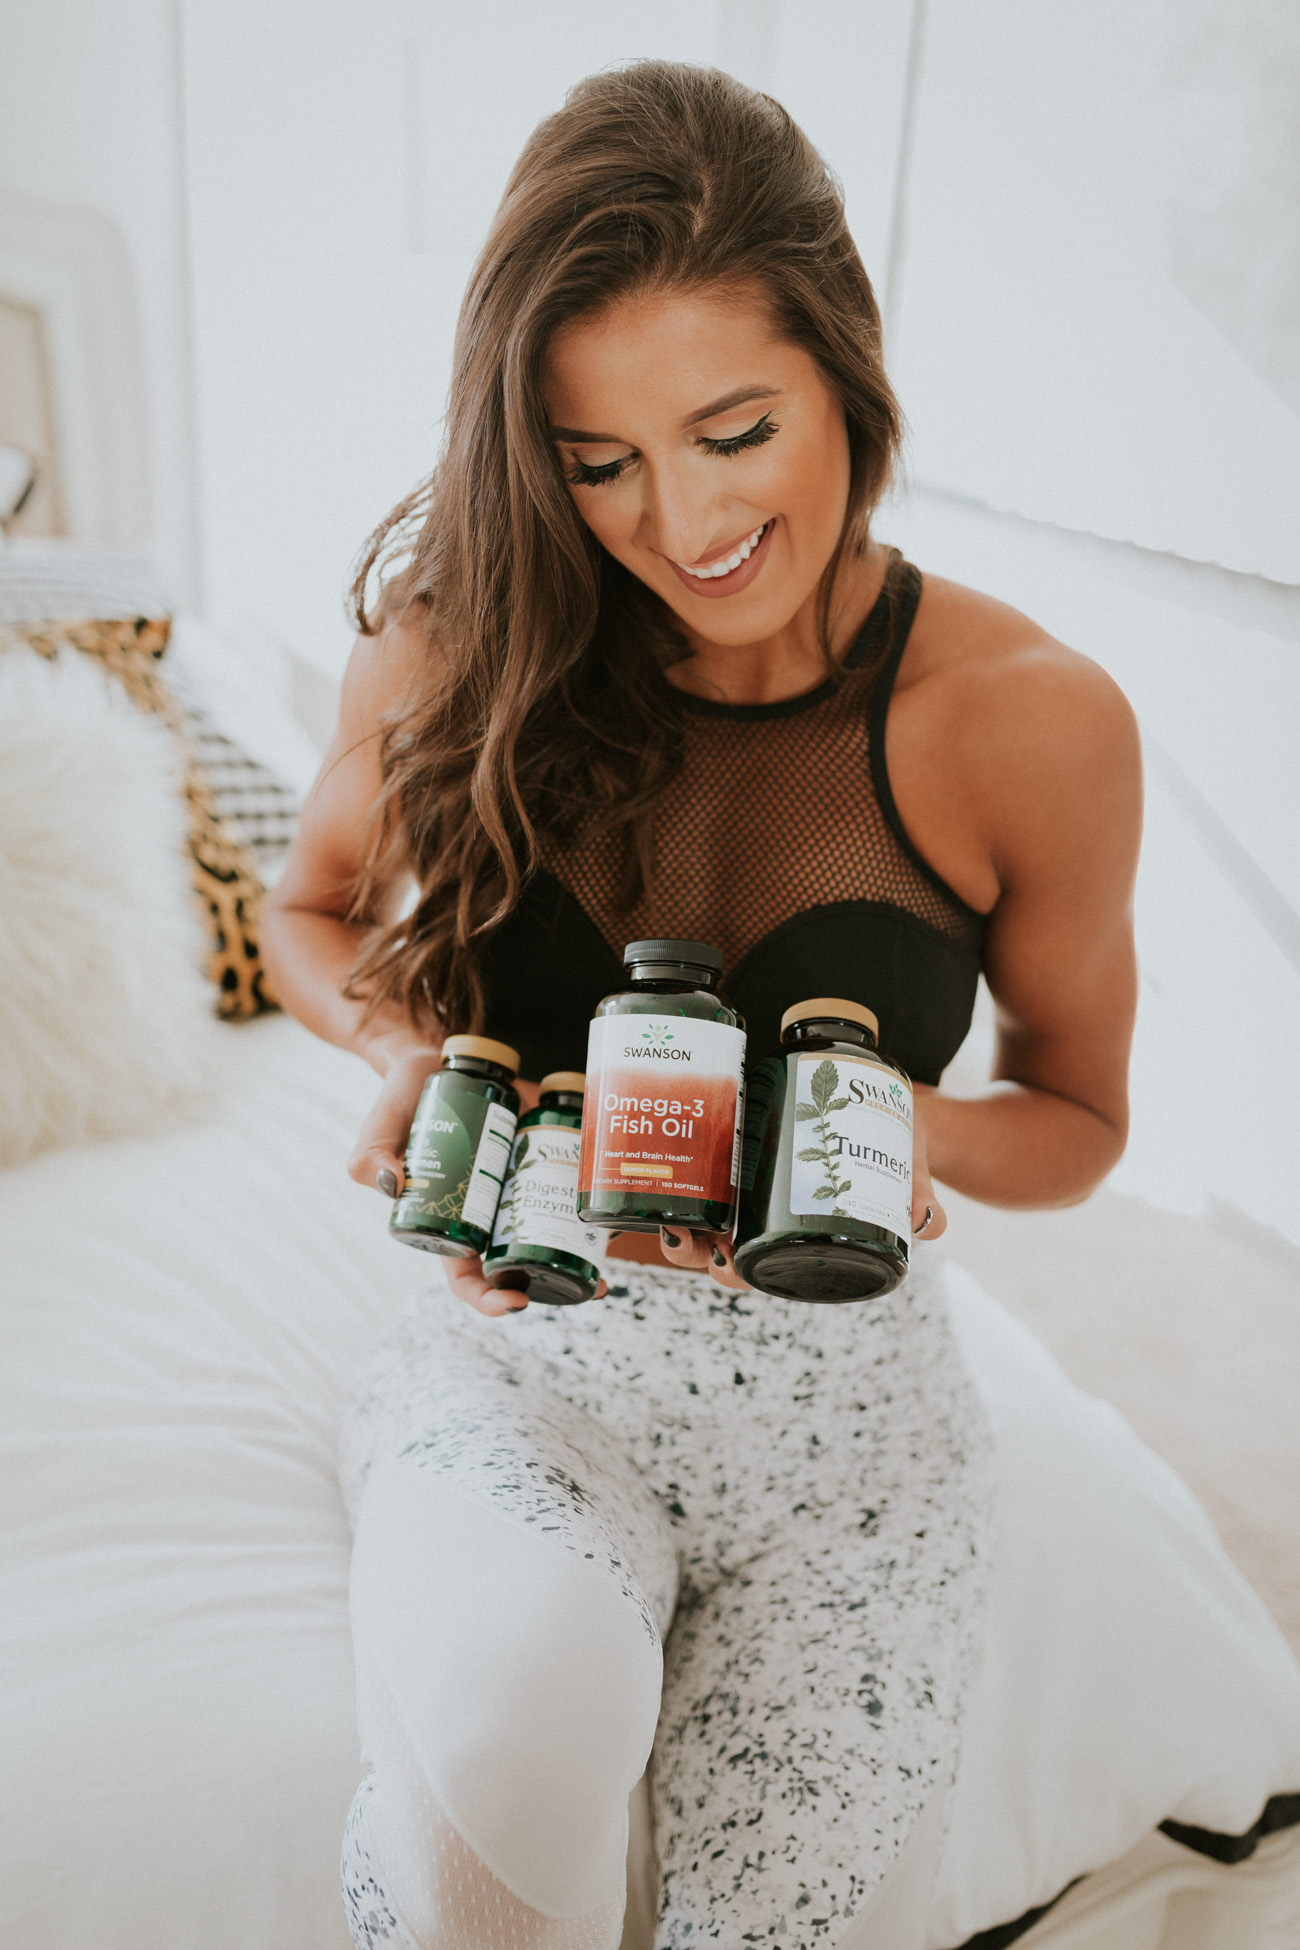 favorite vitamins, favorite supplements, top 5 favorite vitamins, top five favorite vitamins and supplements, swanson health, swanson vitamins, swanson vision defense, a southern drawl nutrition, a southern drawl supplements, a southern drawl fitness, fitwithasd, #fitwithasd // grace wainwright a southern drawl